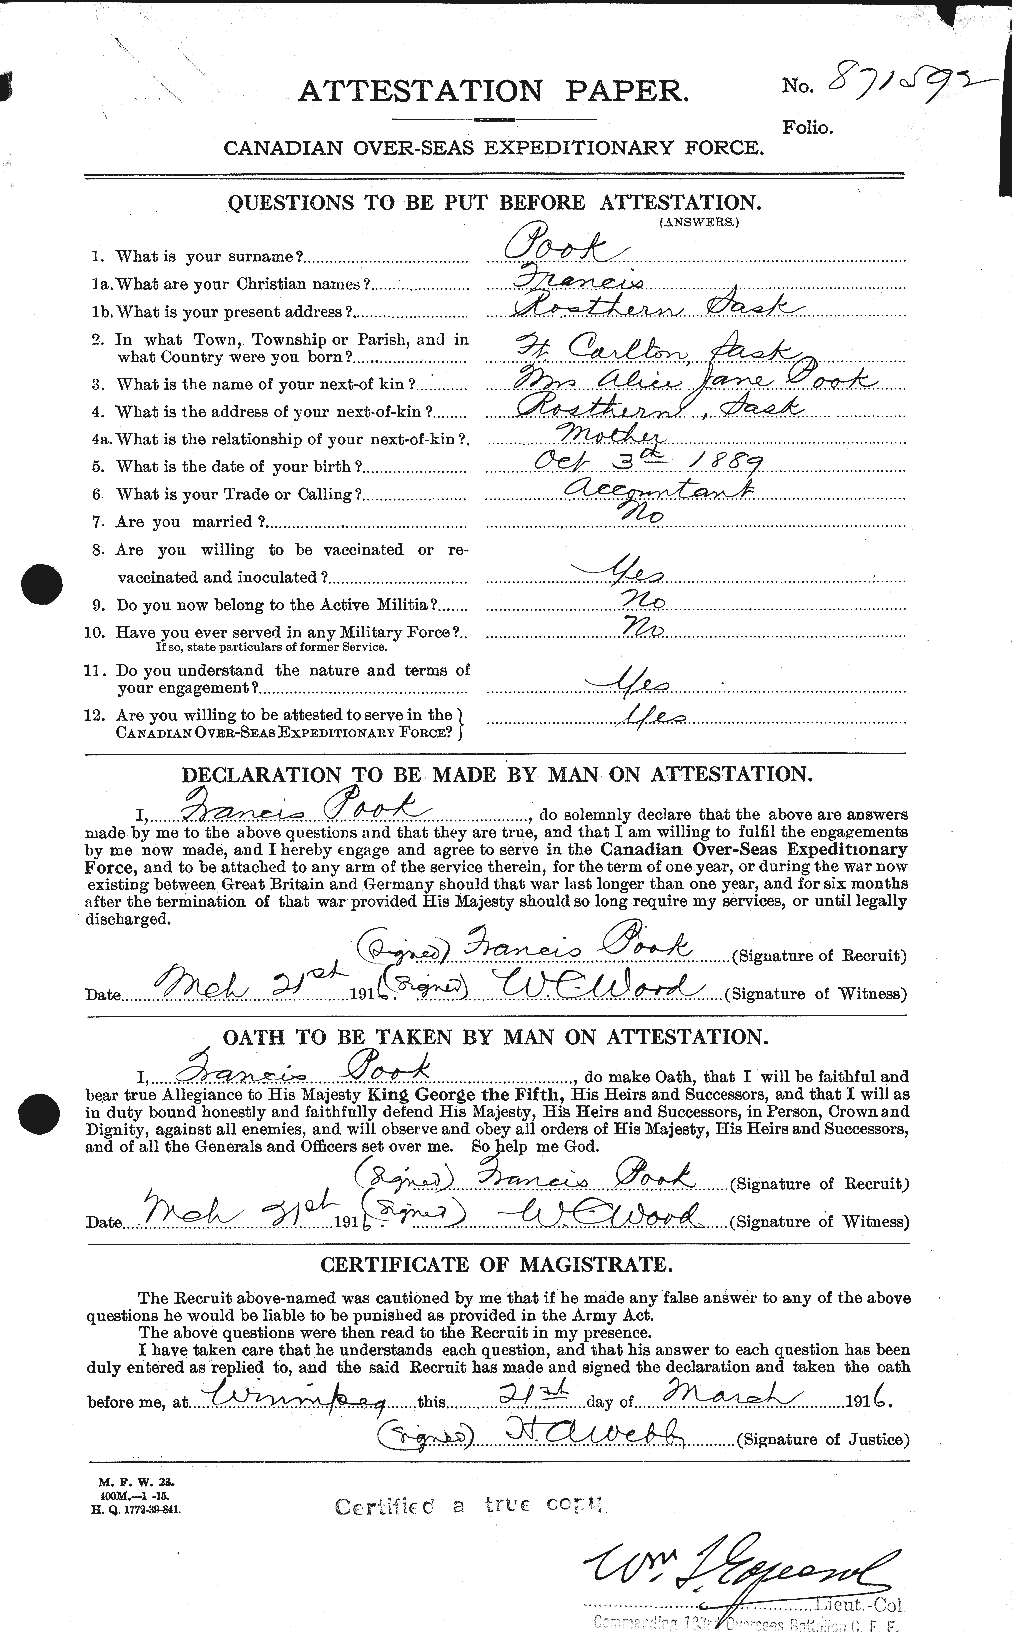 Personnel Records of the First World War - CEF 581189a